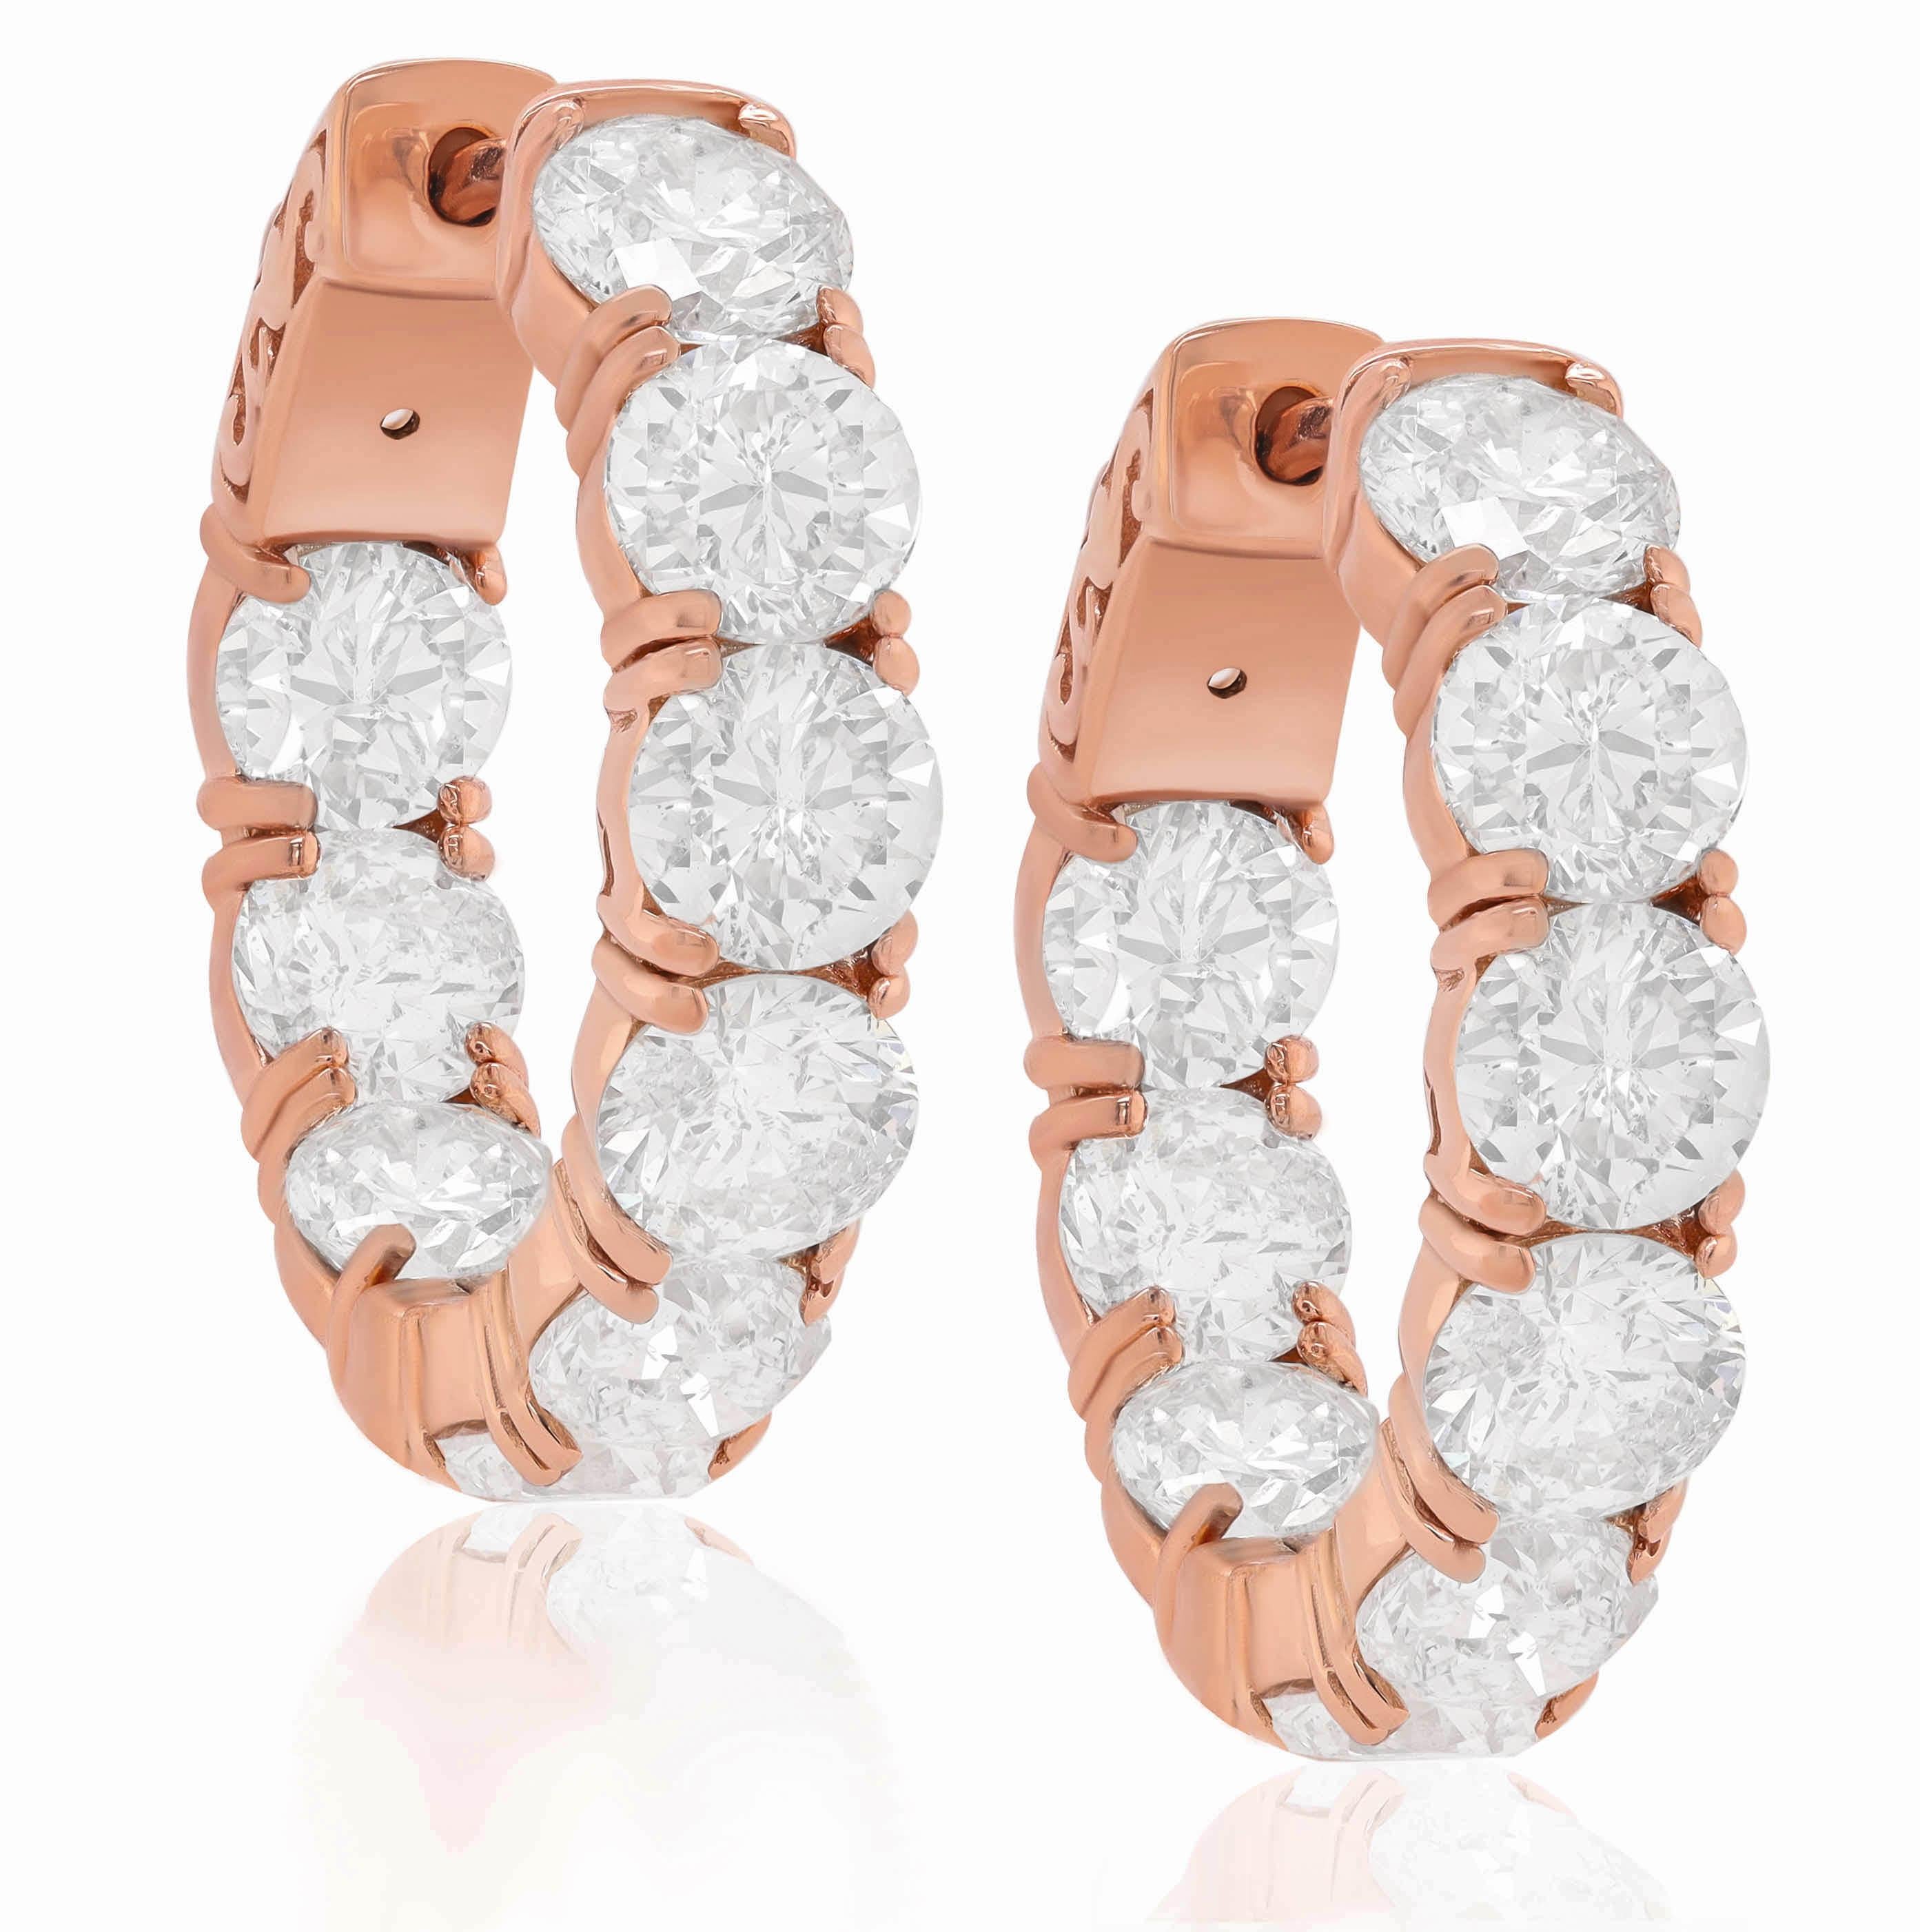 18K Rose Gold Diamond Earrings featuring 7.85 Carats of Diamonds

Underline your look with this sharp 18K Rose gold clover shape Diamond Earrings. High quality Diamonds. This Earrings will underline your exquisite look for any occasion.

. is a